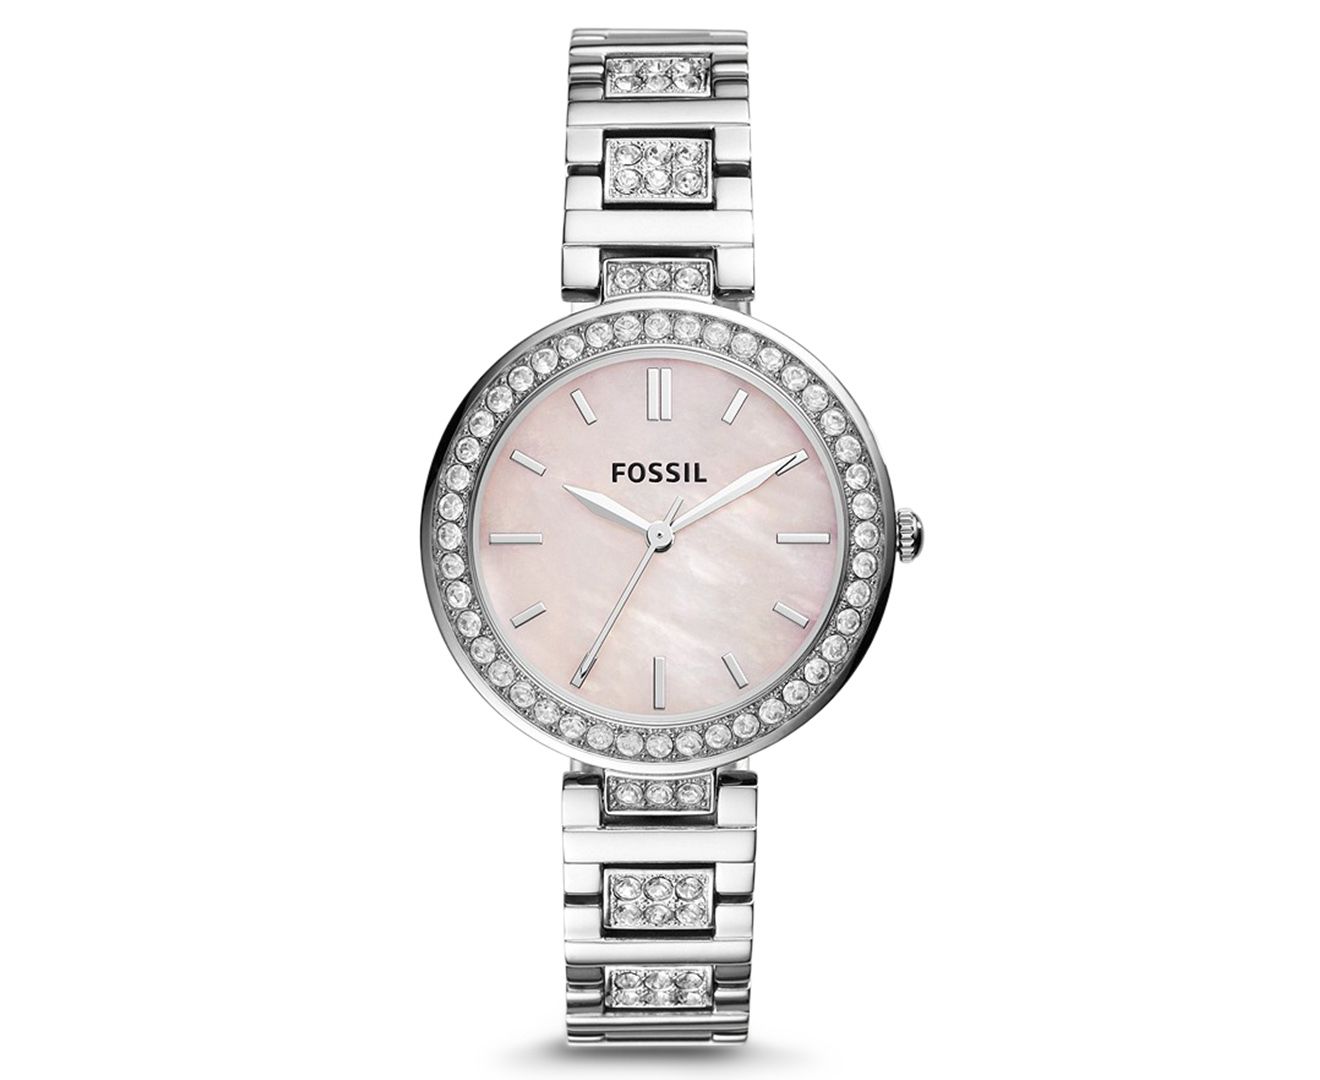 Fossil Women's 34mm Karli Stainless Steel Watch - Silver/Mother of ...